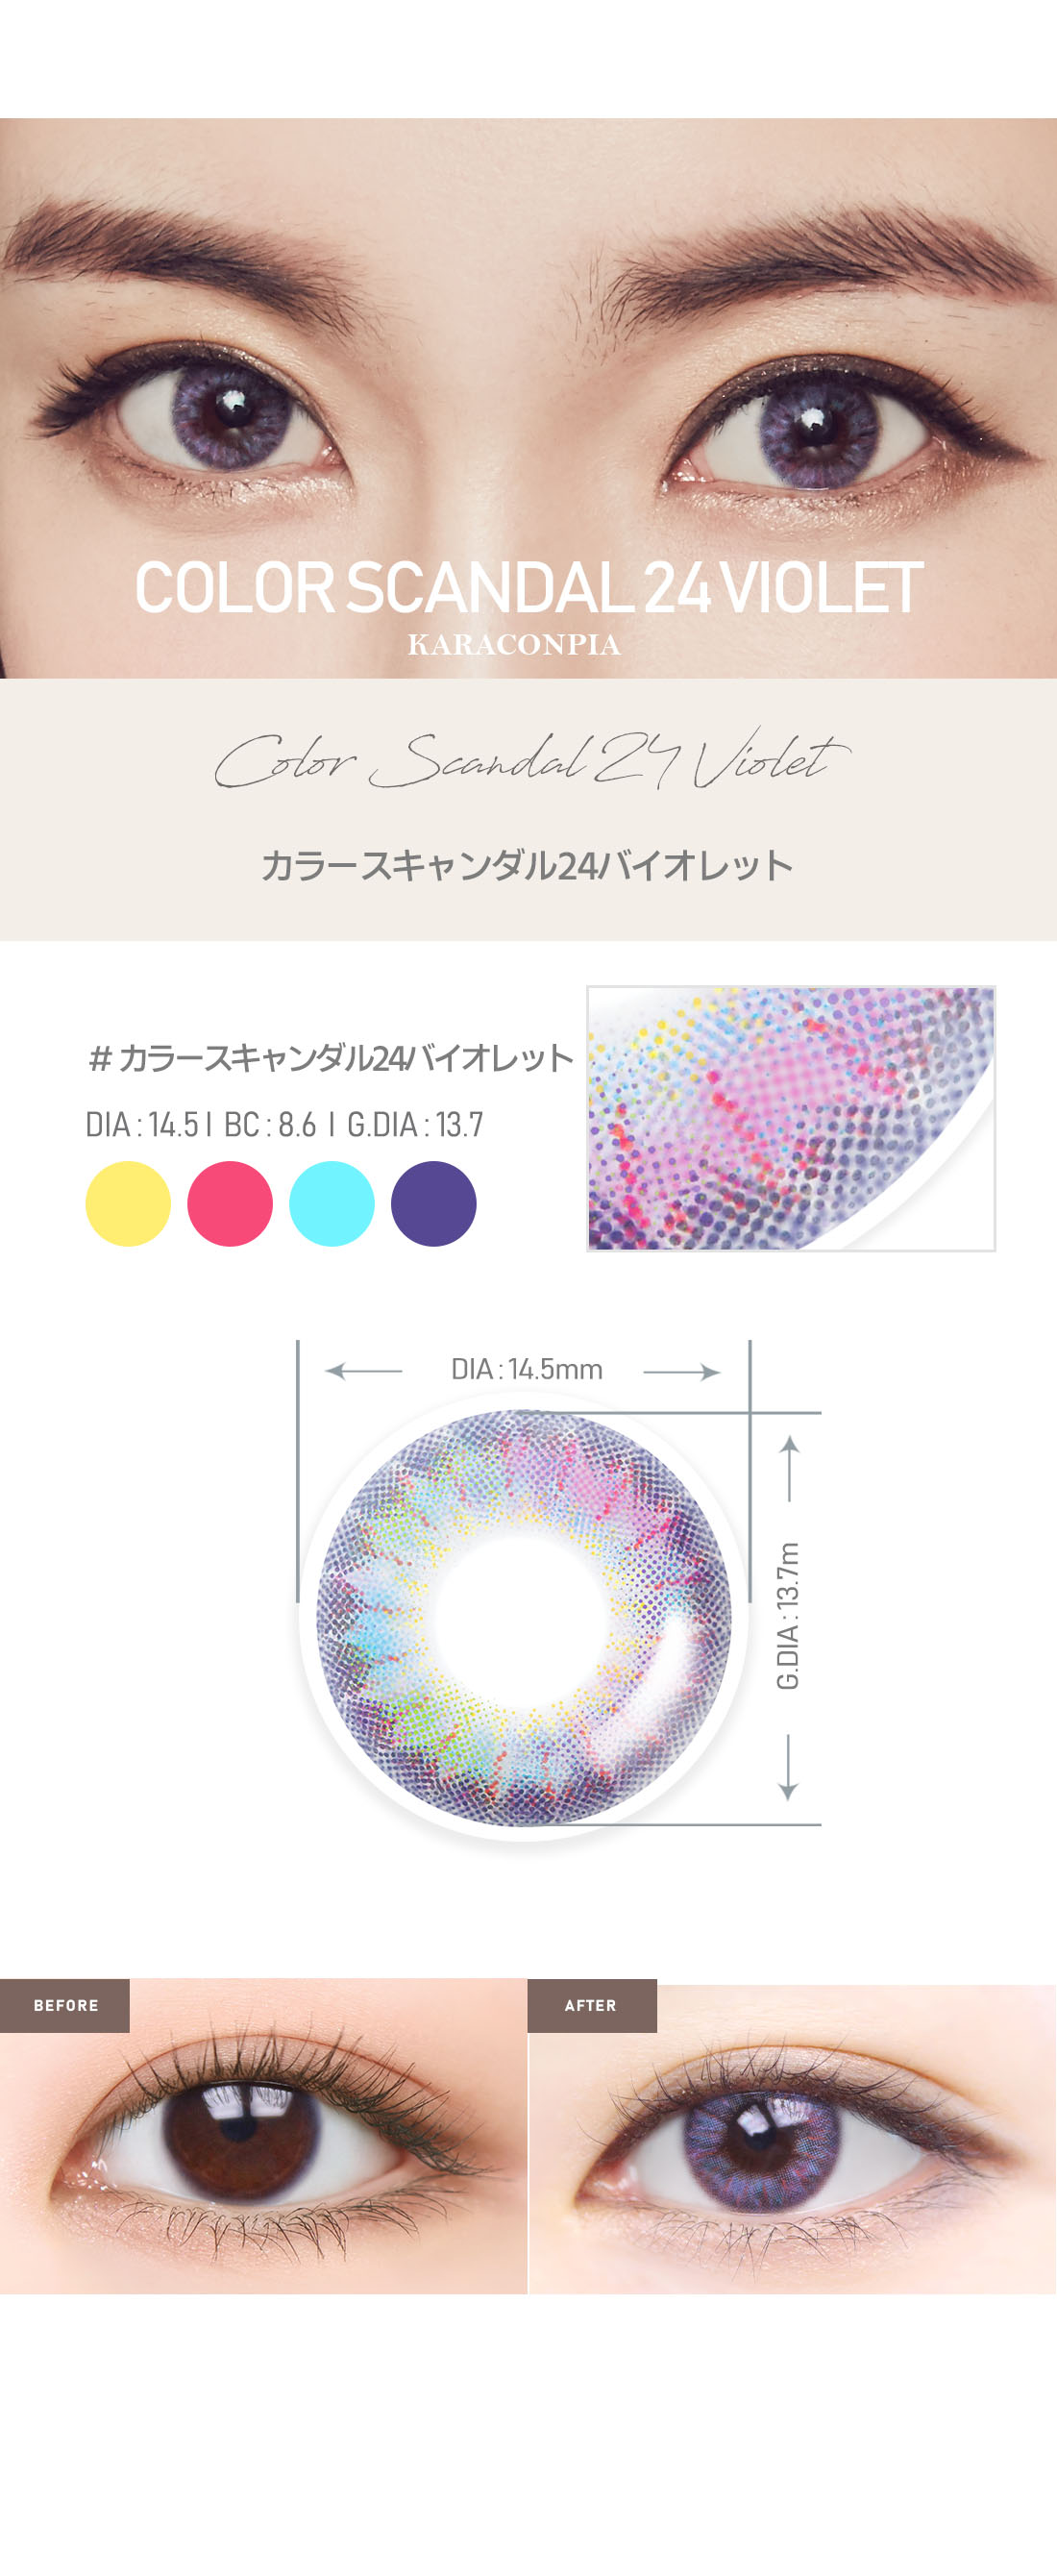 【OUTLET】　カラースキャンダル24バイオレット (Color Scandal 24 Violet)/ 使用期限 : 2024年2月まで